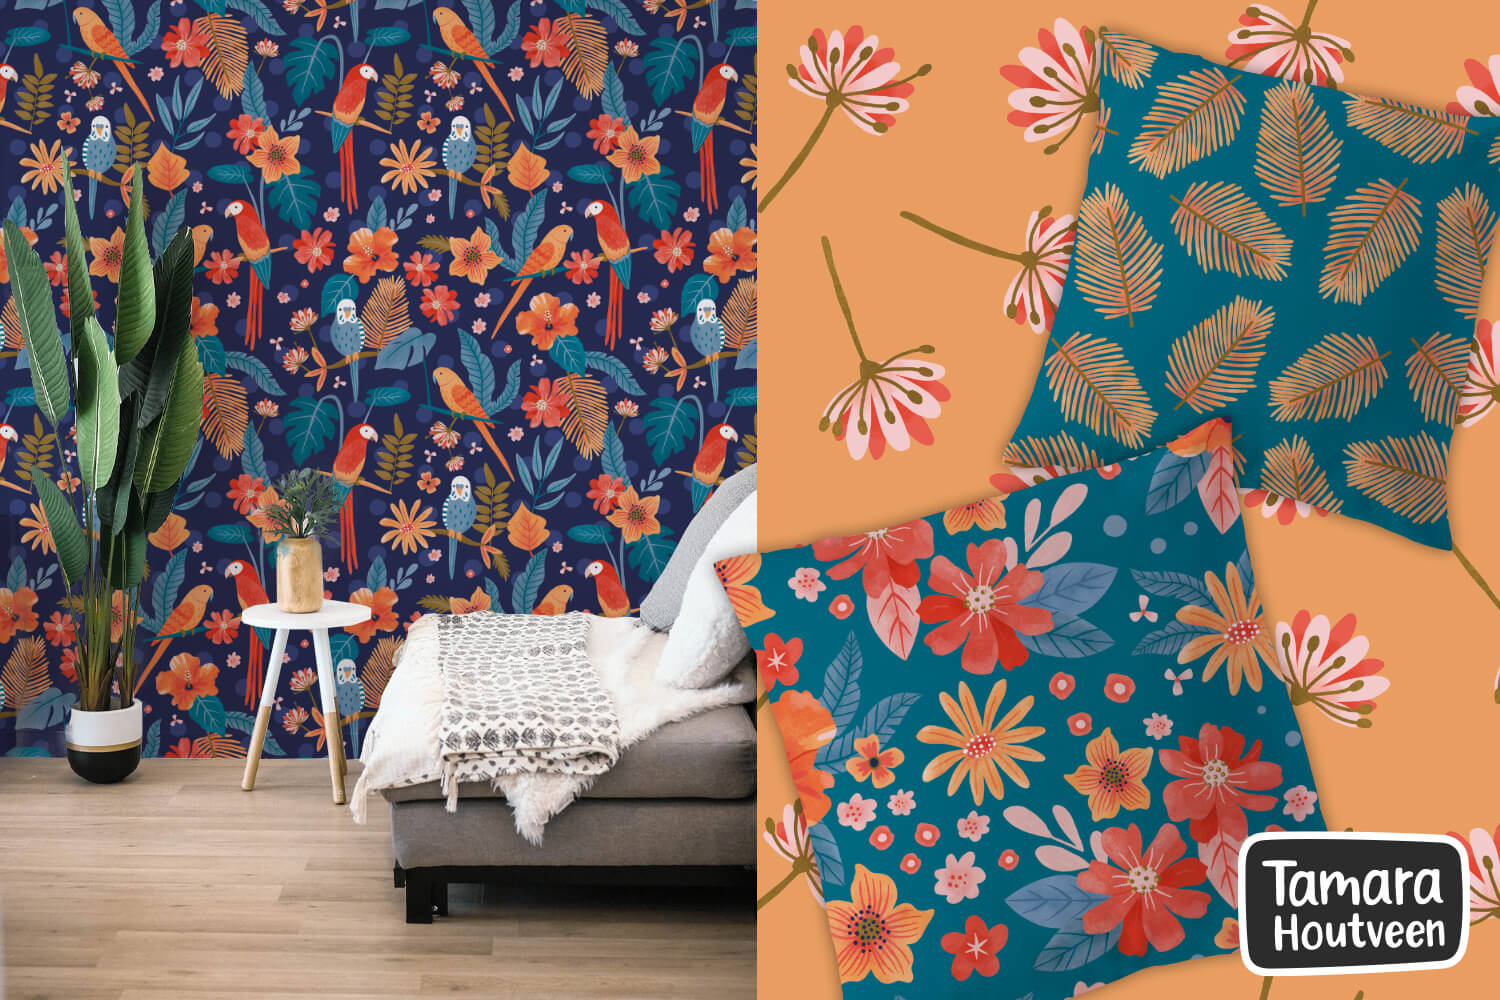 Mockup of the tropical birds and flowers pattern collection by Tamara Houtveen